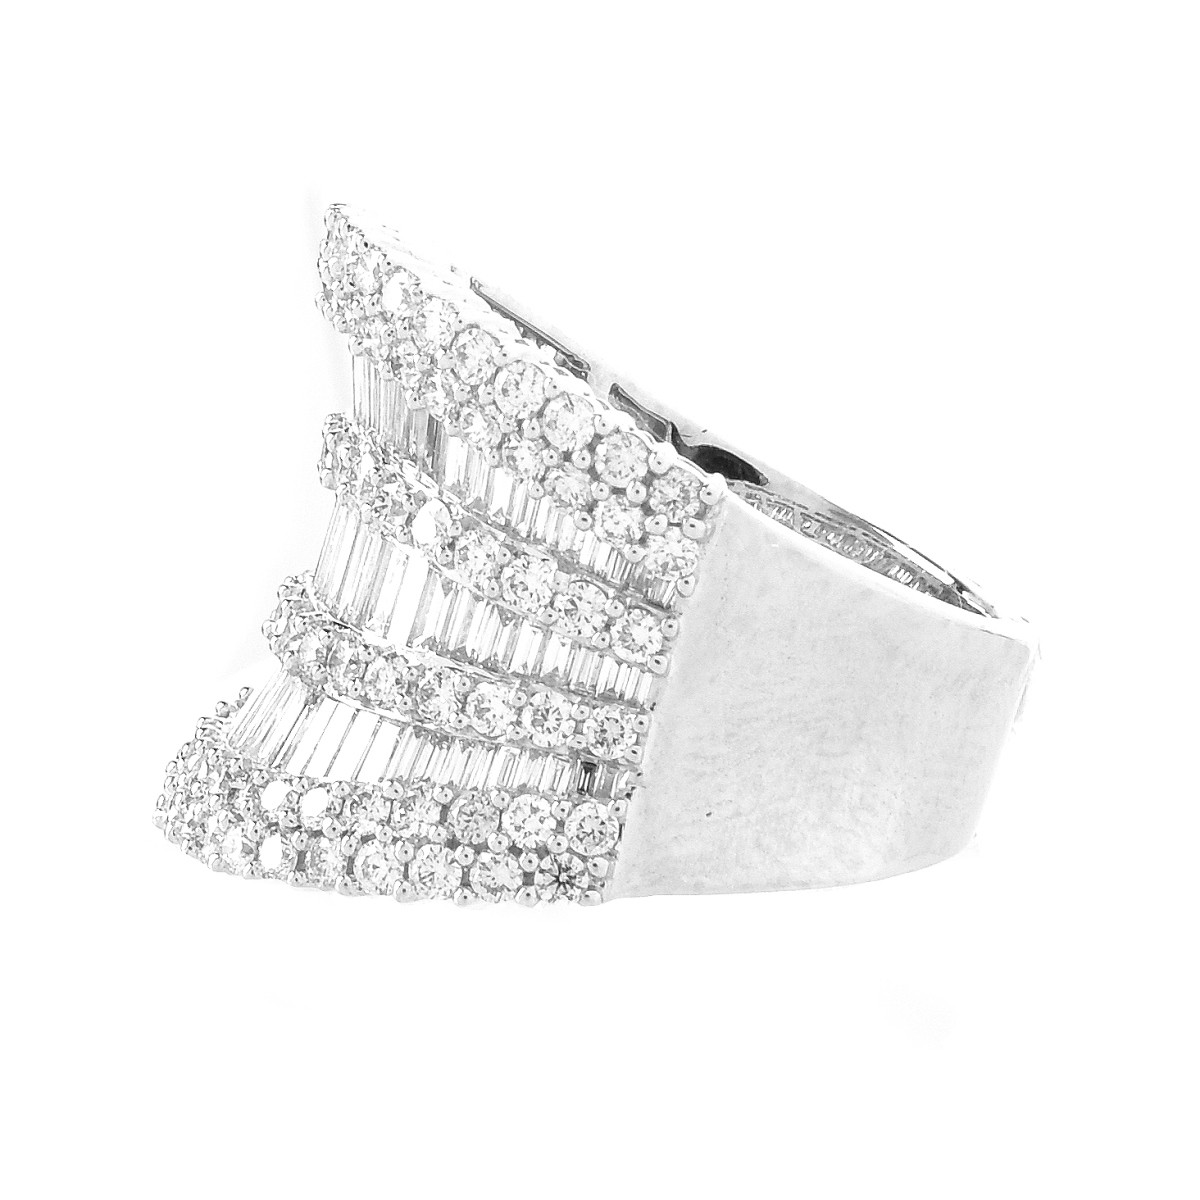 5.0ct TW Diamond and 18K Gold Ring - Image 3 of 6